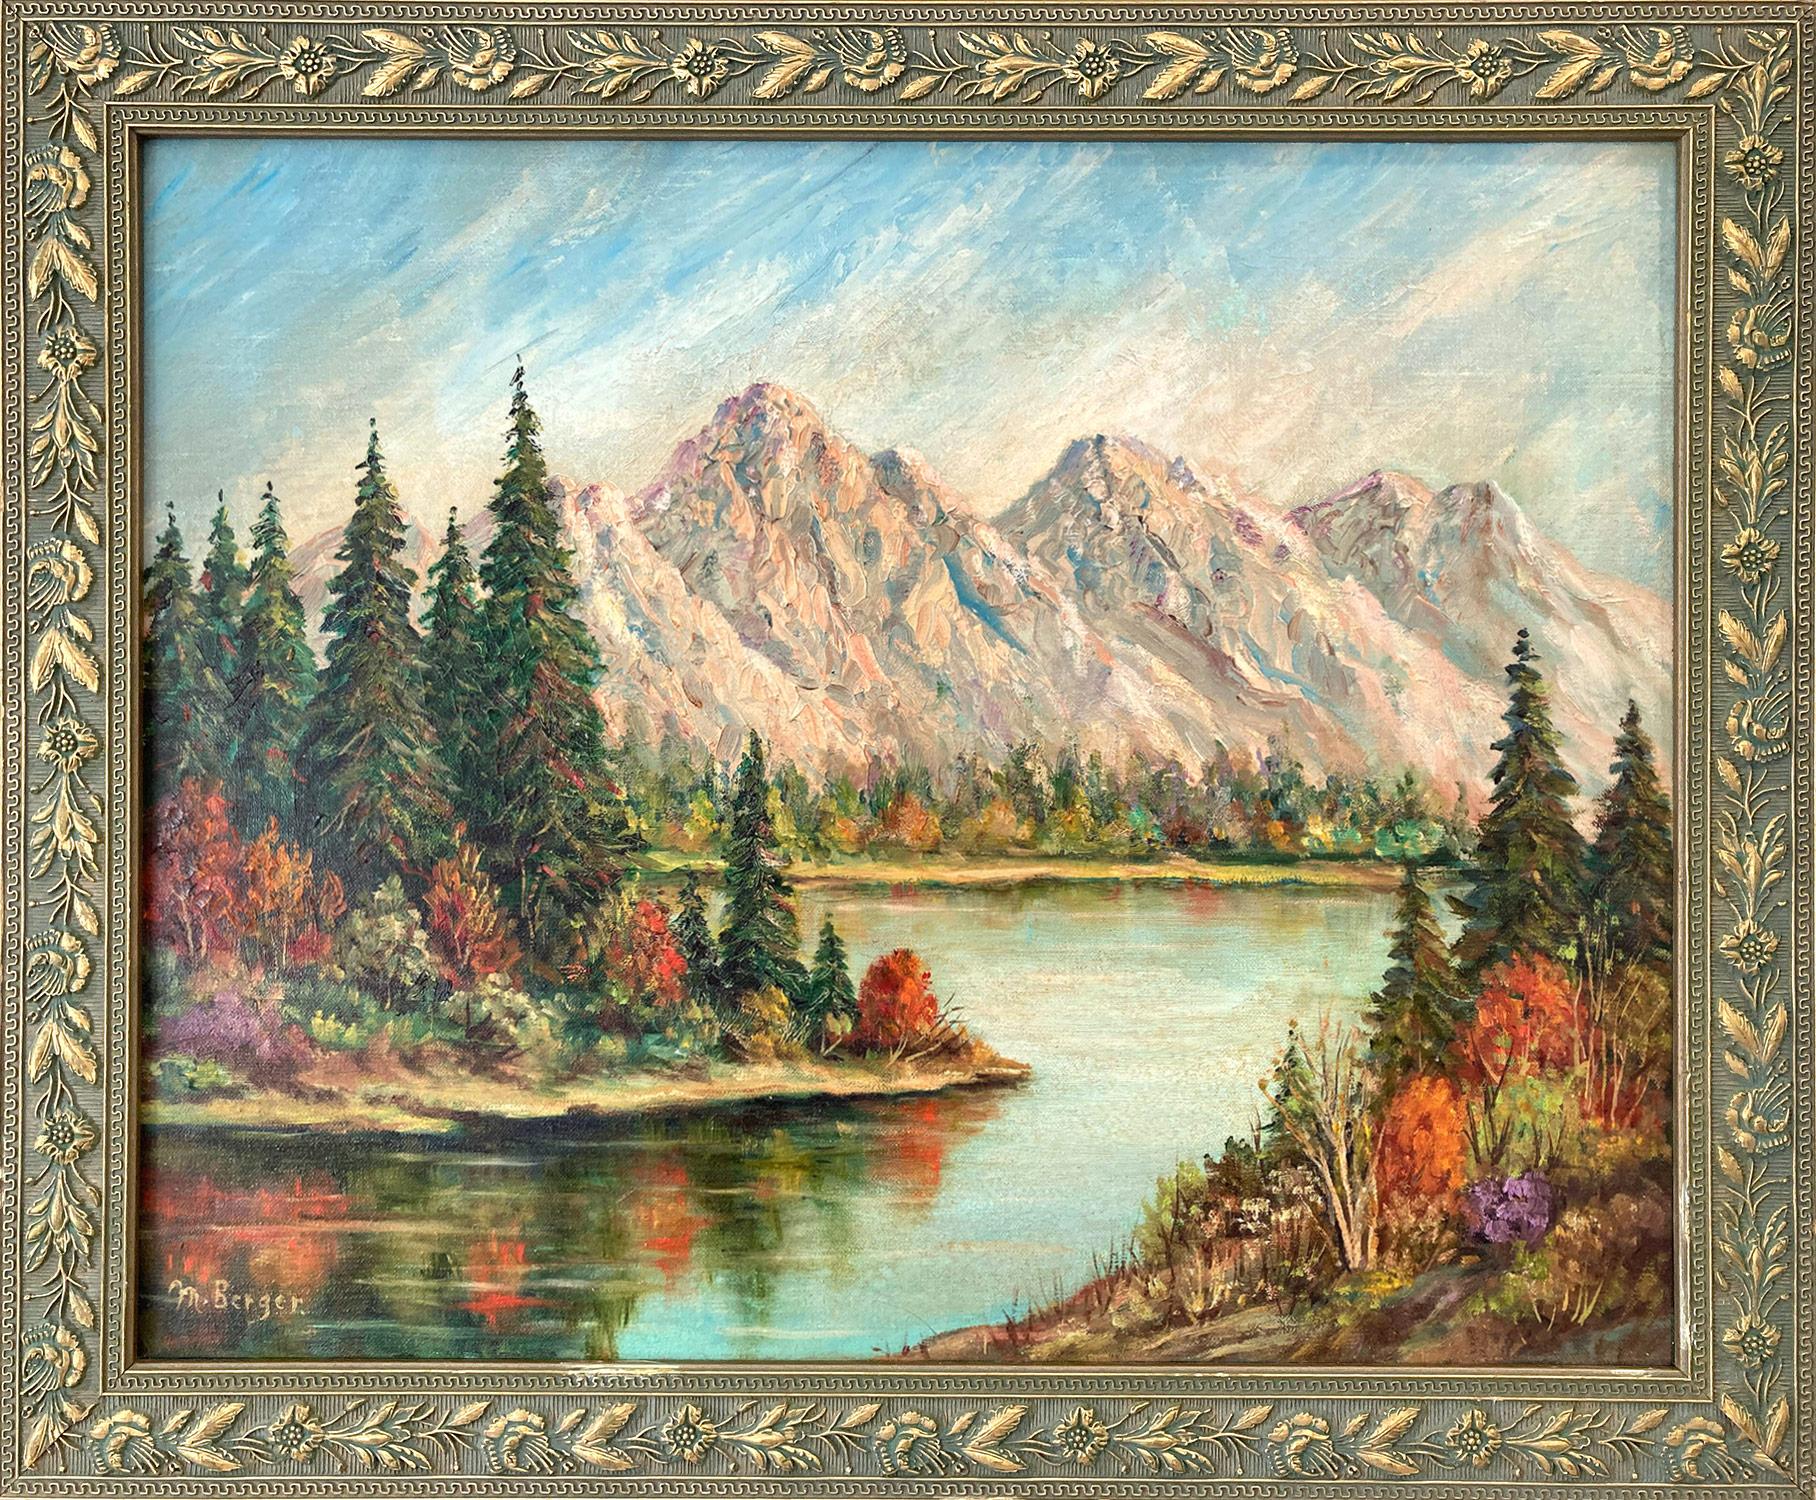 Marie Berger Landscape Painting - "Mountain Lake in Autumn" American Mid Century Oil Painting on Canvas Landscape